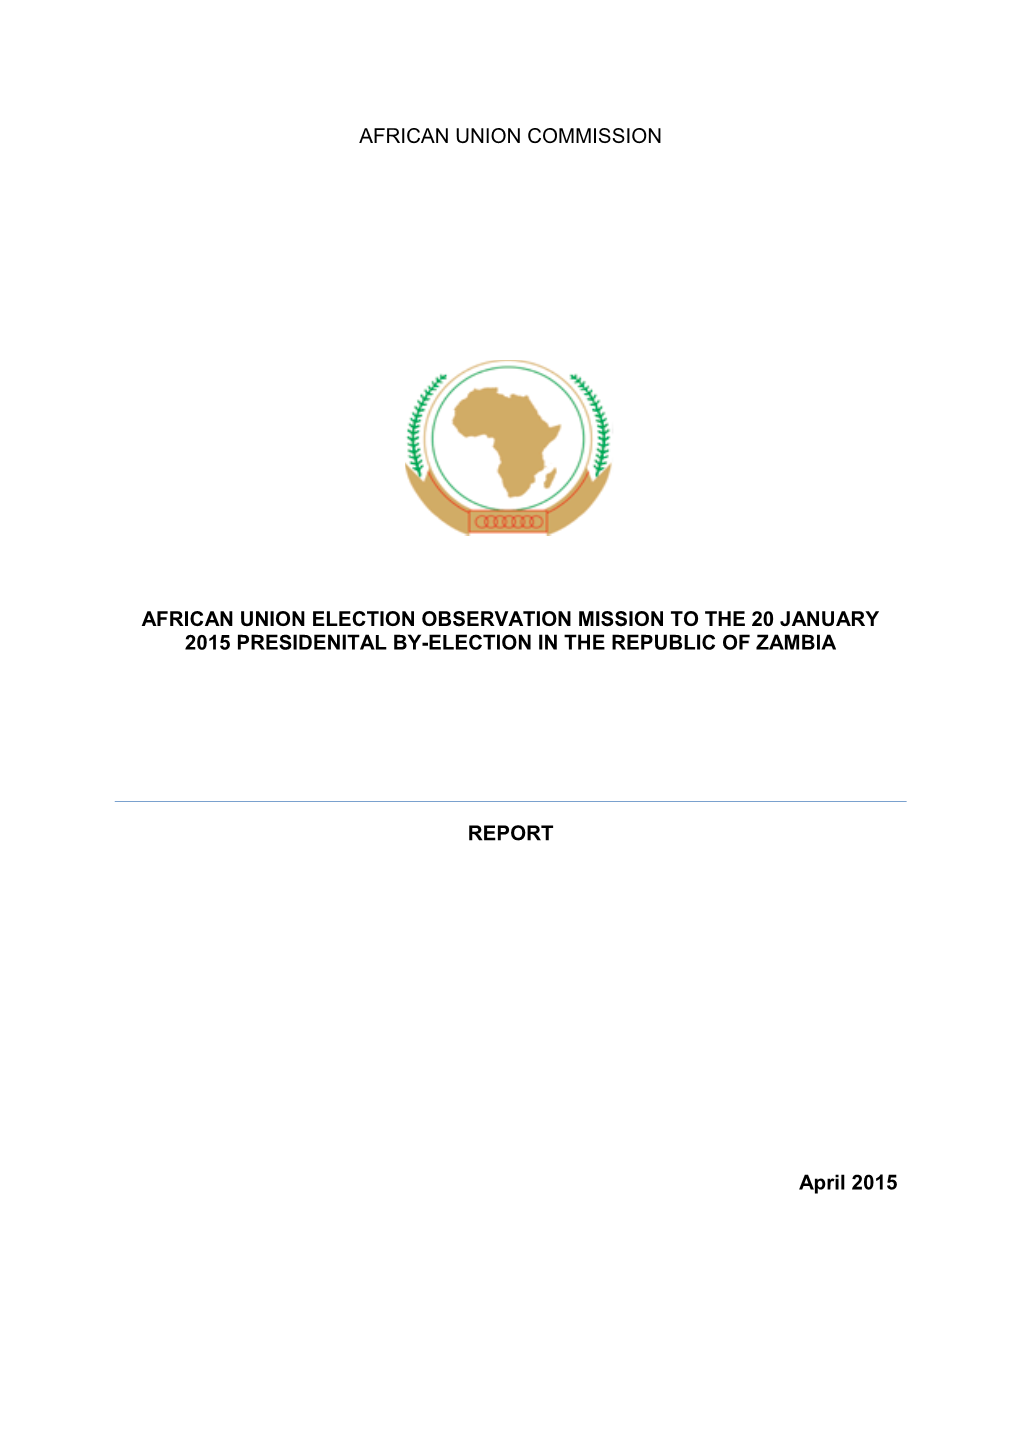 African Union Election Observeraion Mission Report: Zambia 2015